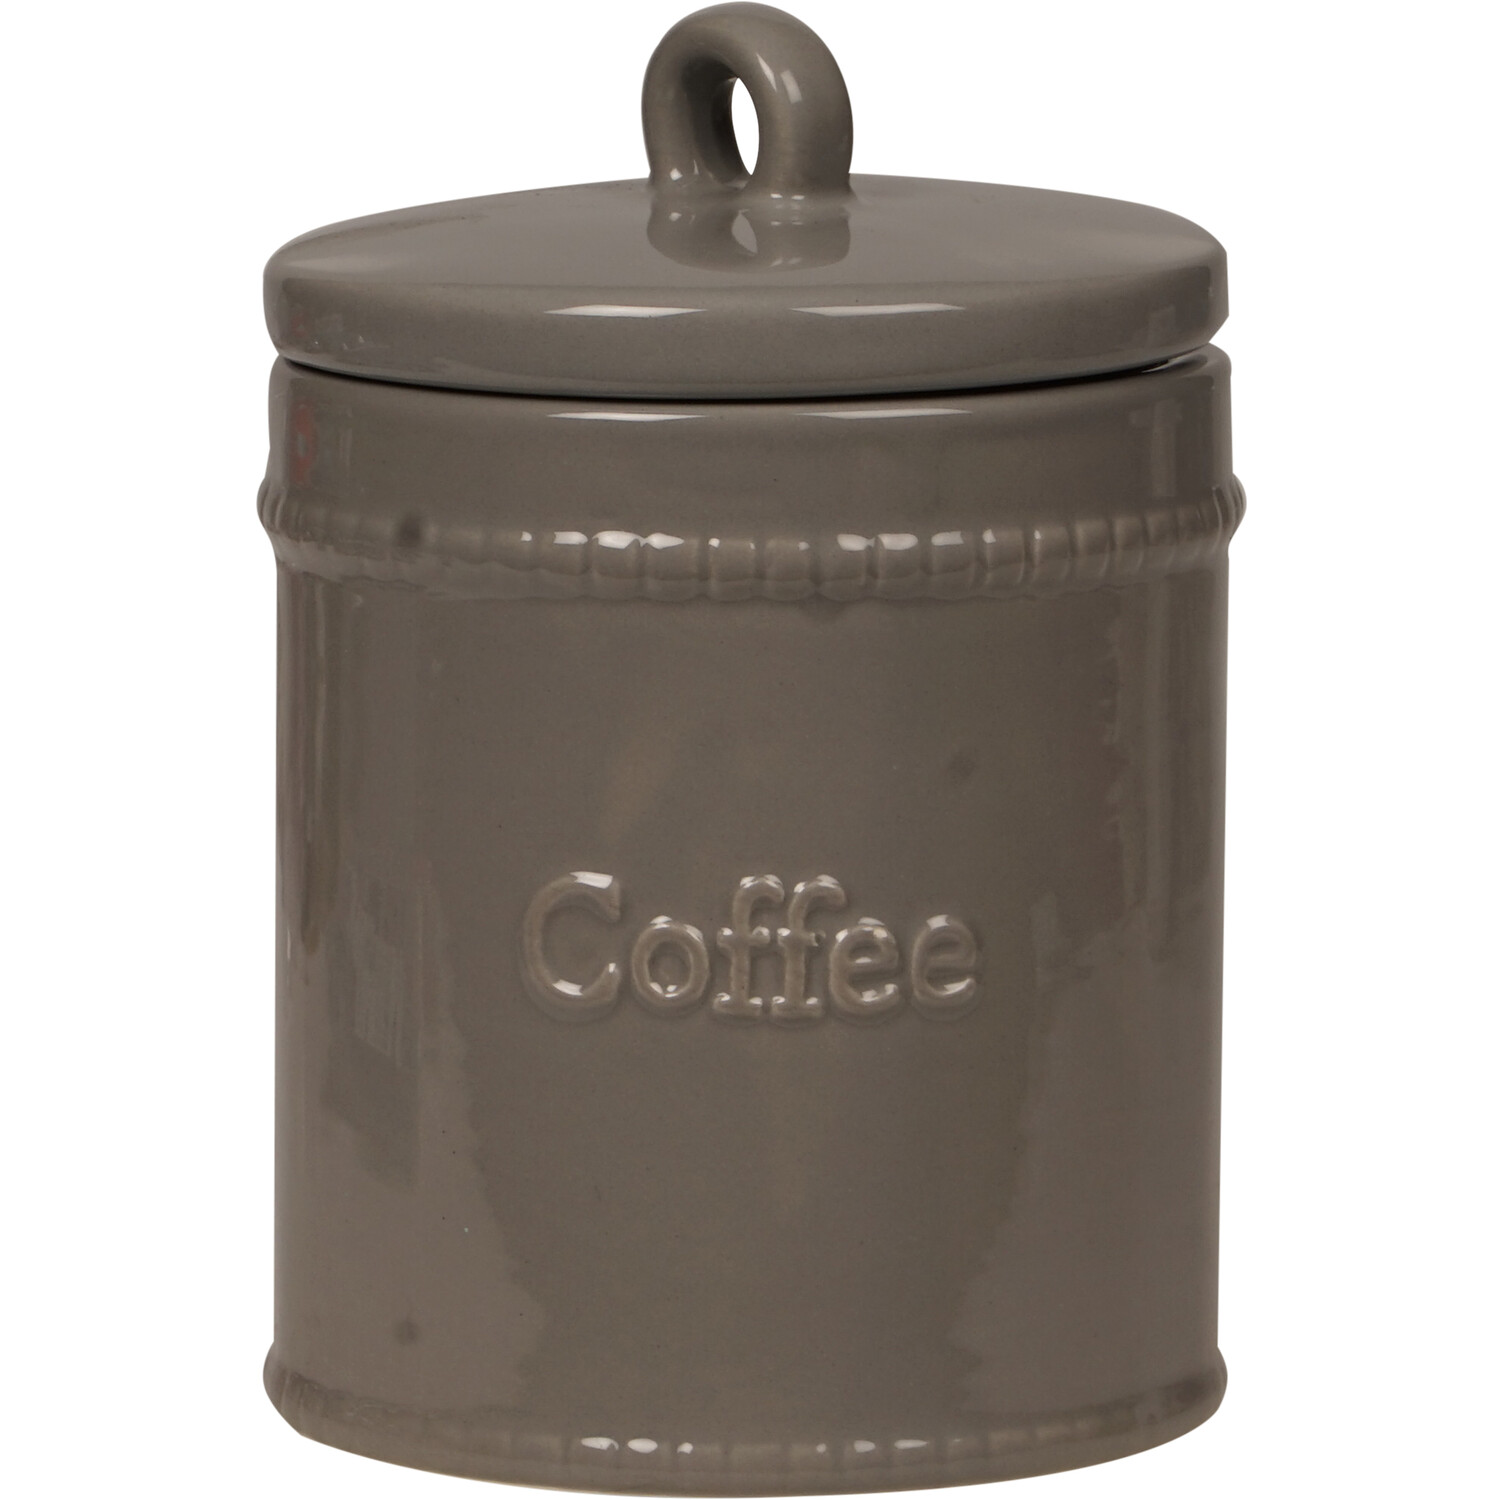 Tankard Kitchen Canister - Grey / Coffee Image